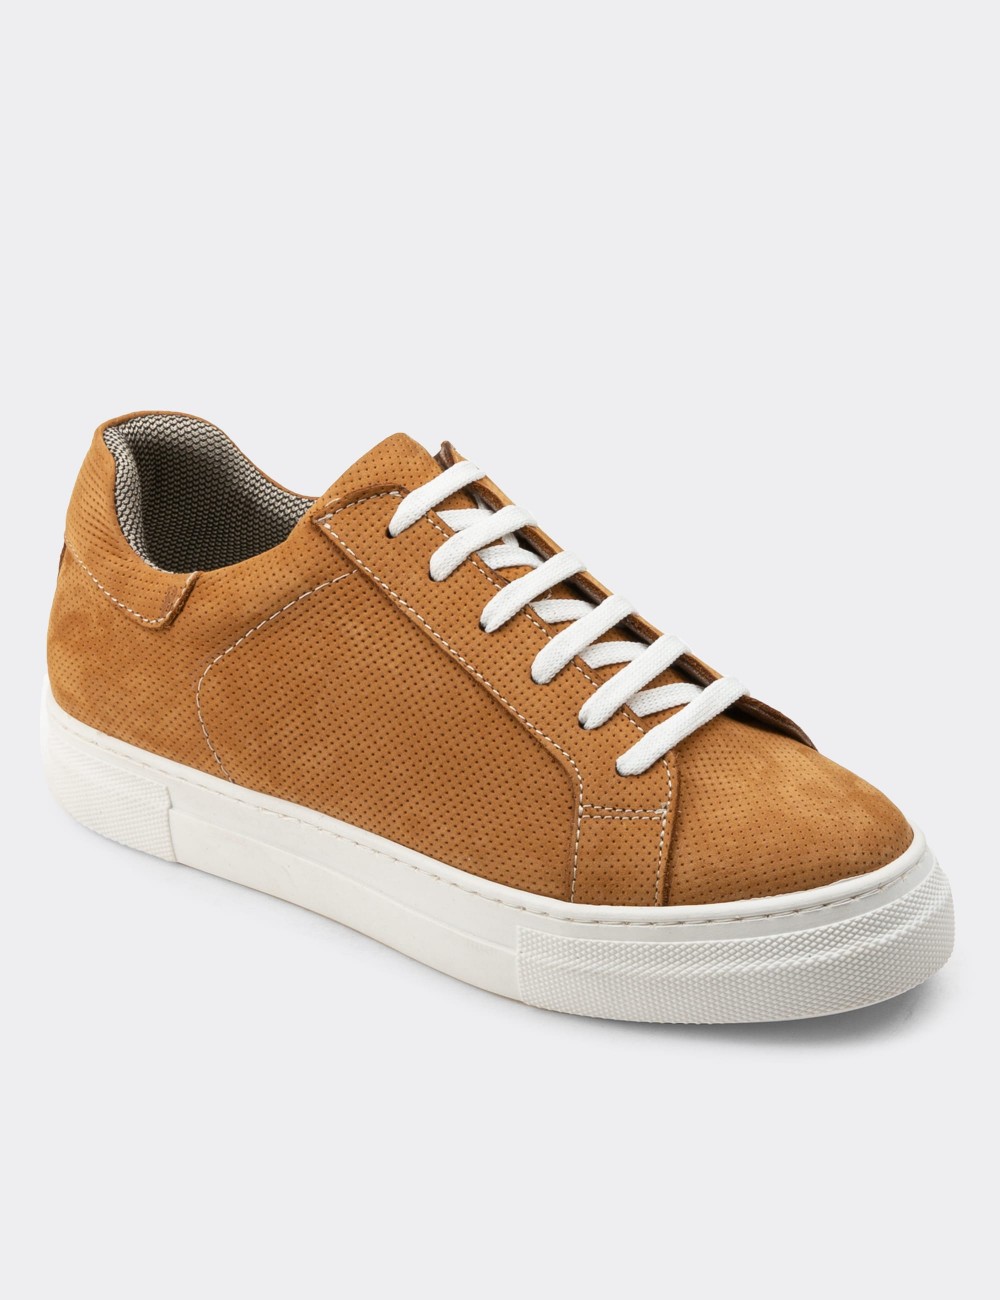 Buy Woodland Men Nubuck Leather Sneakers - Casual Shoes for Men 9337947 |  Myntra